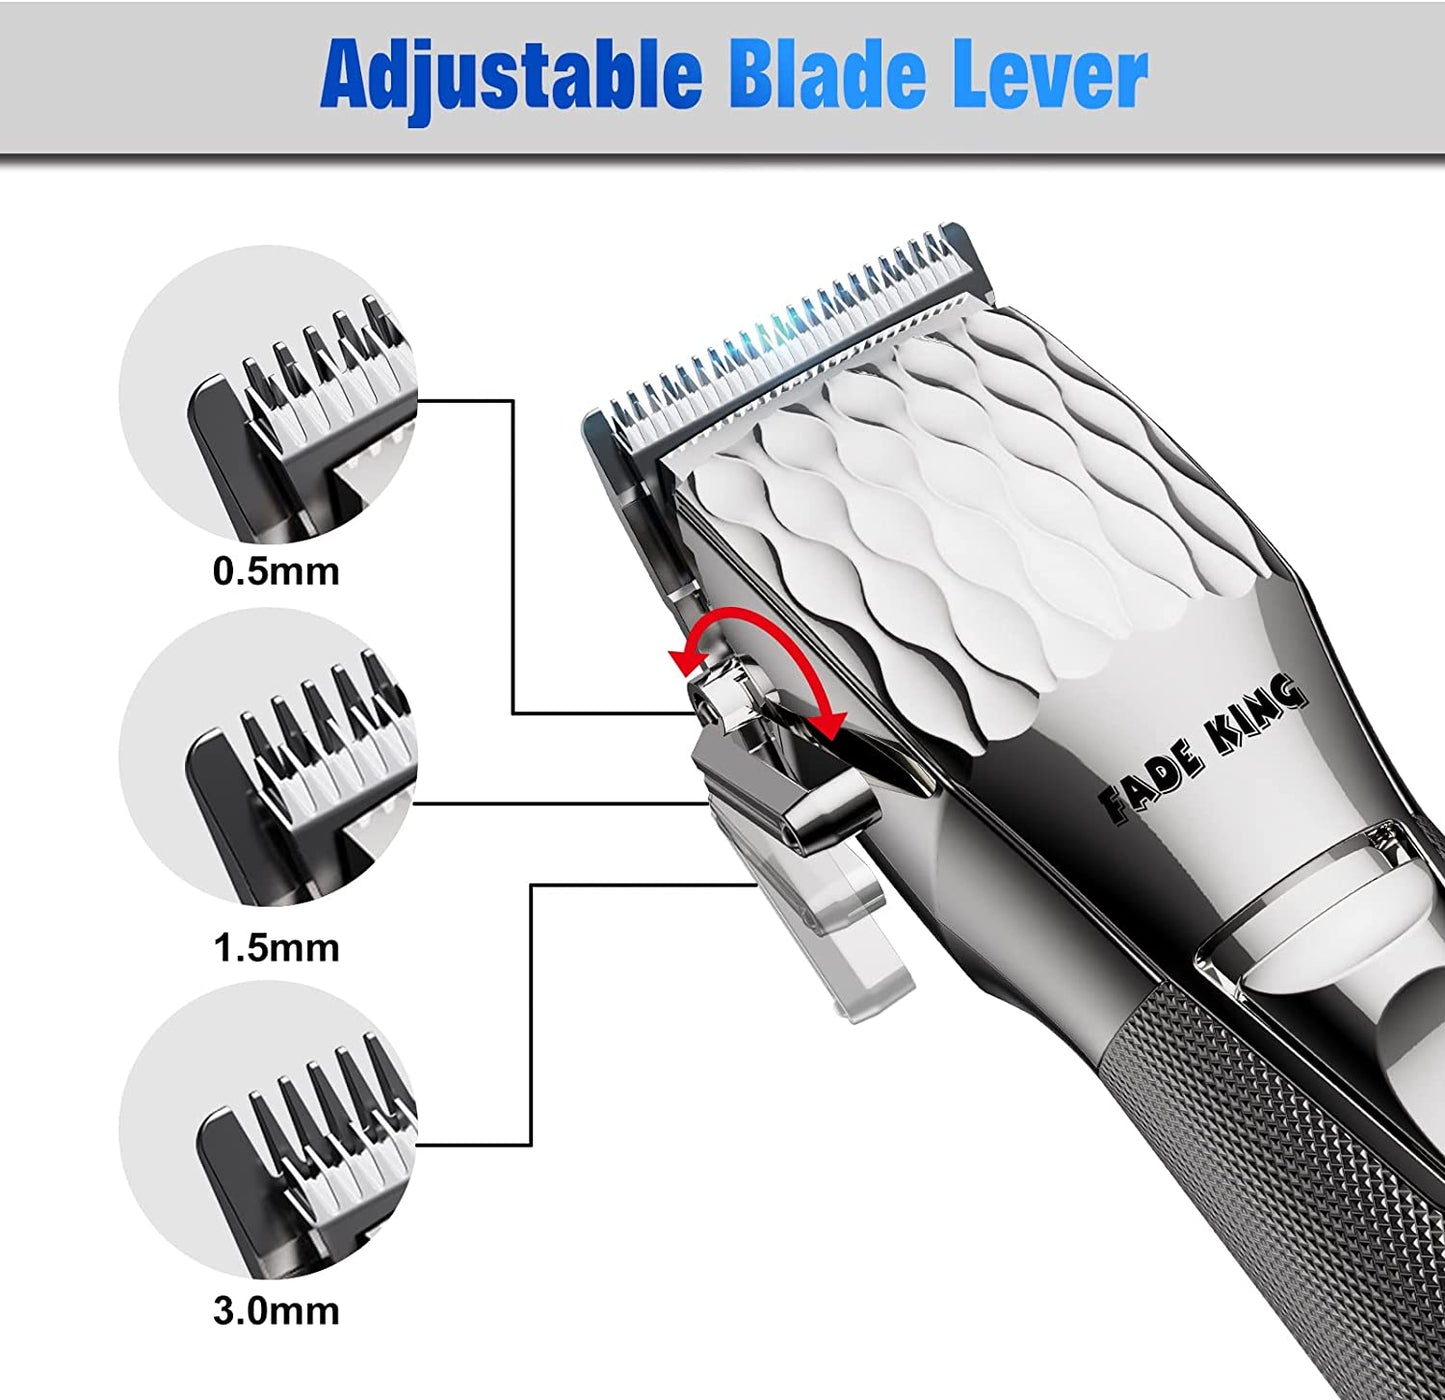 FADEKING Professional Hair Clippers for Men - Best Men's electric hair clippers, Rechargeable Hair Beard Trimmer with LED Display & Quality Travel Storage Case (Silver)